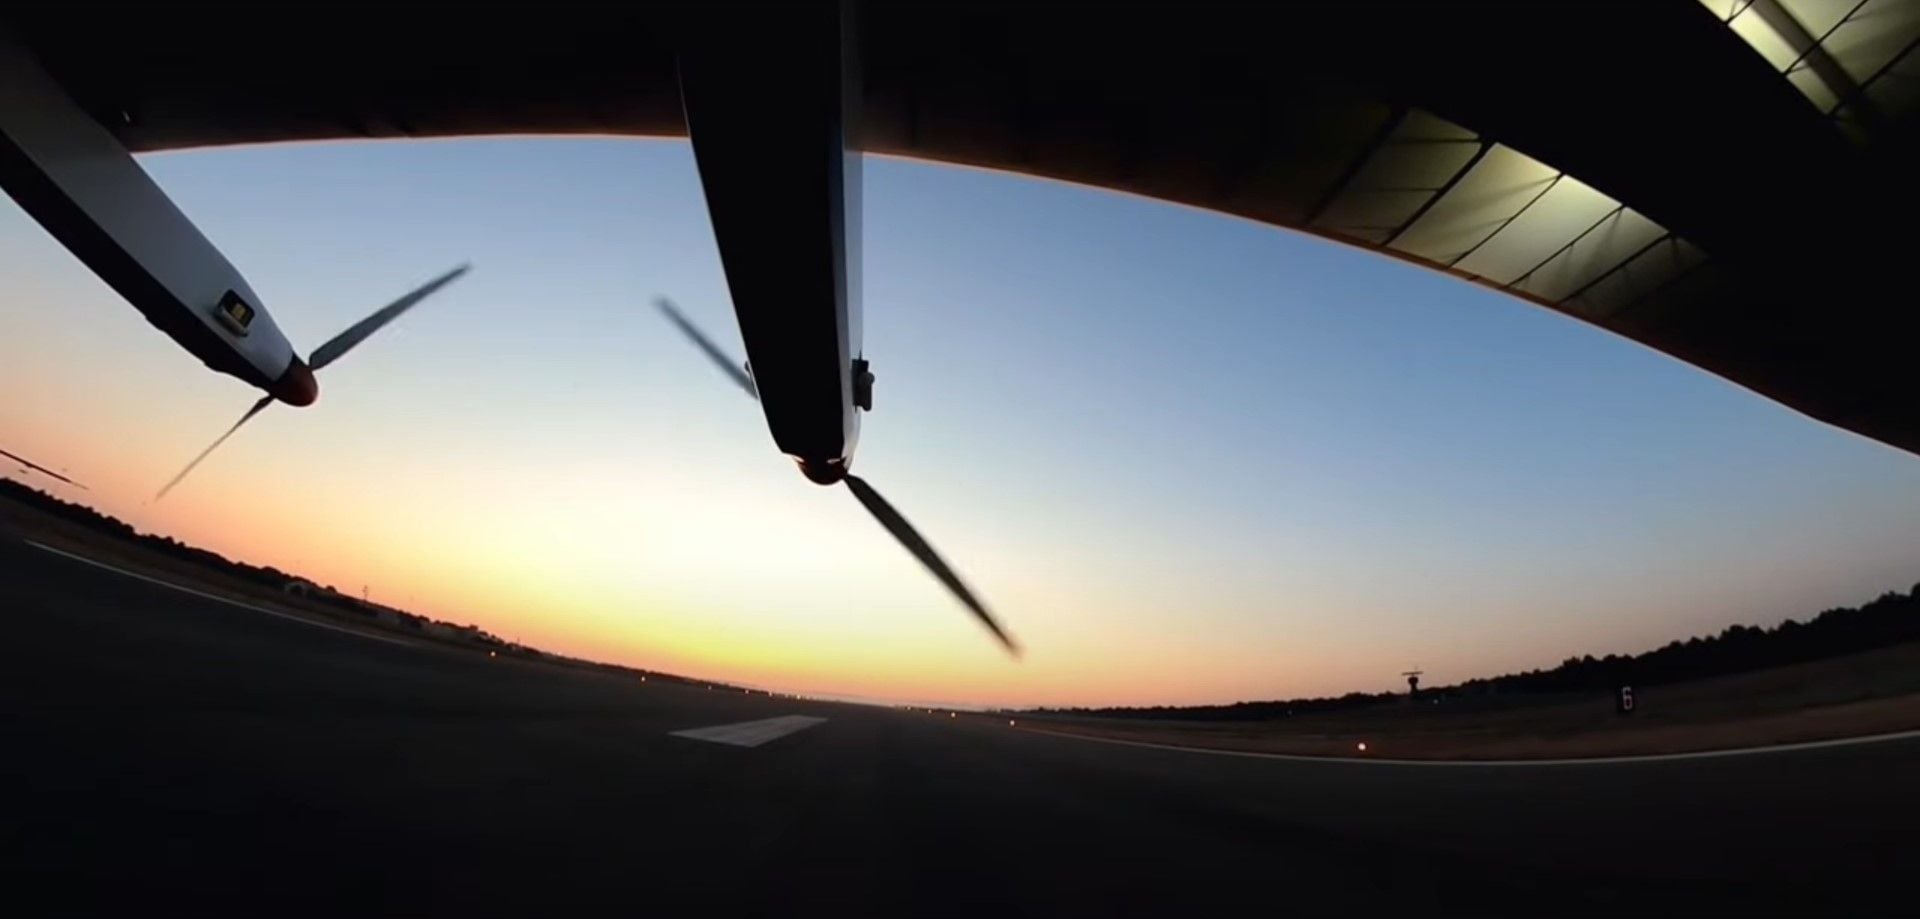 View from under the wing of the U.S. Navy's unmanned, solar-powered Skydweller aircraft.